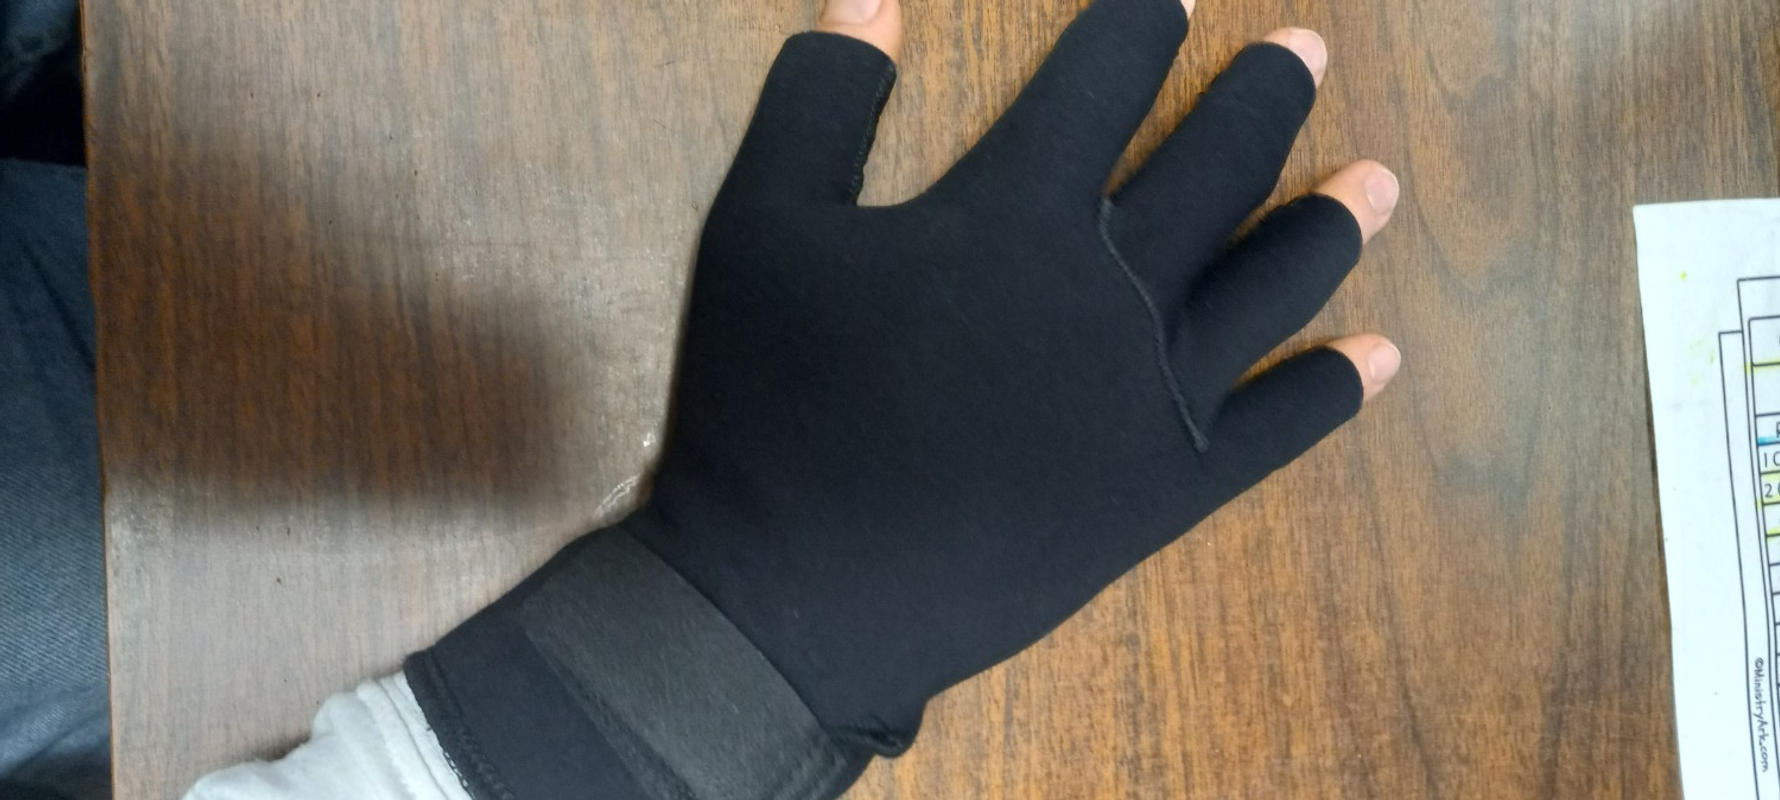 Suede-O | Thermal Arthritic Hand Gloves